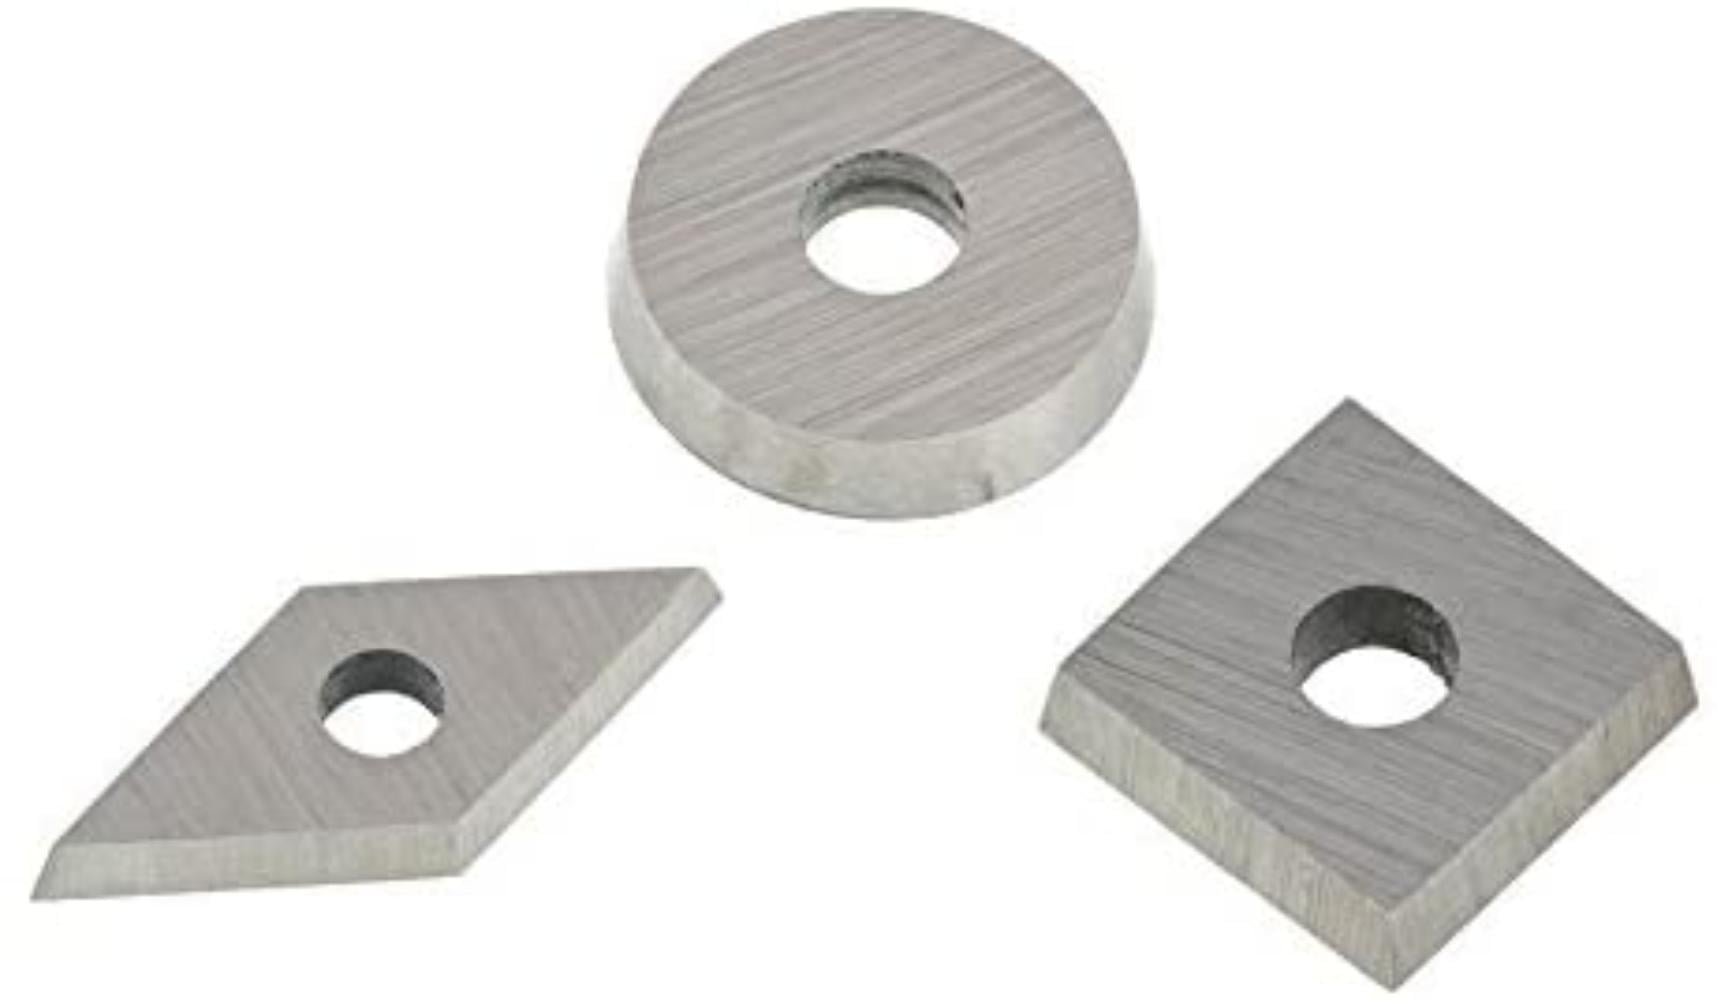 Robert Sorby Turnmaster PACK OF 3 HIGH SPEED STEEL CUTTERS 1,2,3 RSTM-TIP123 